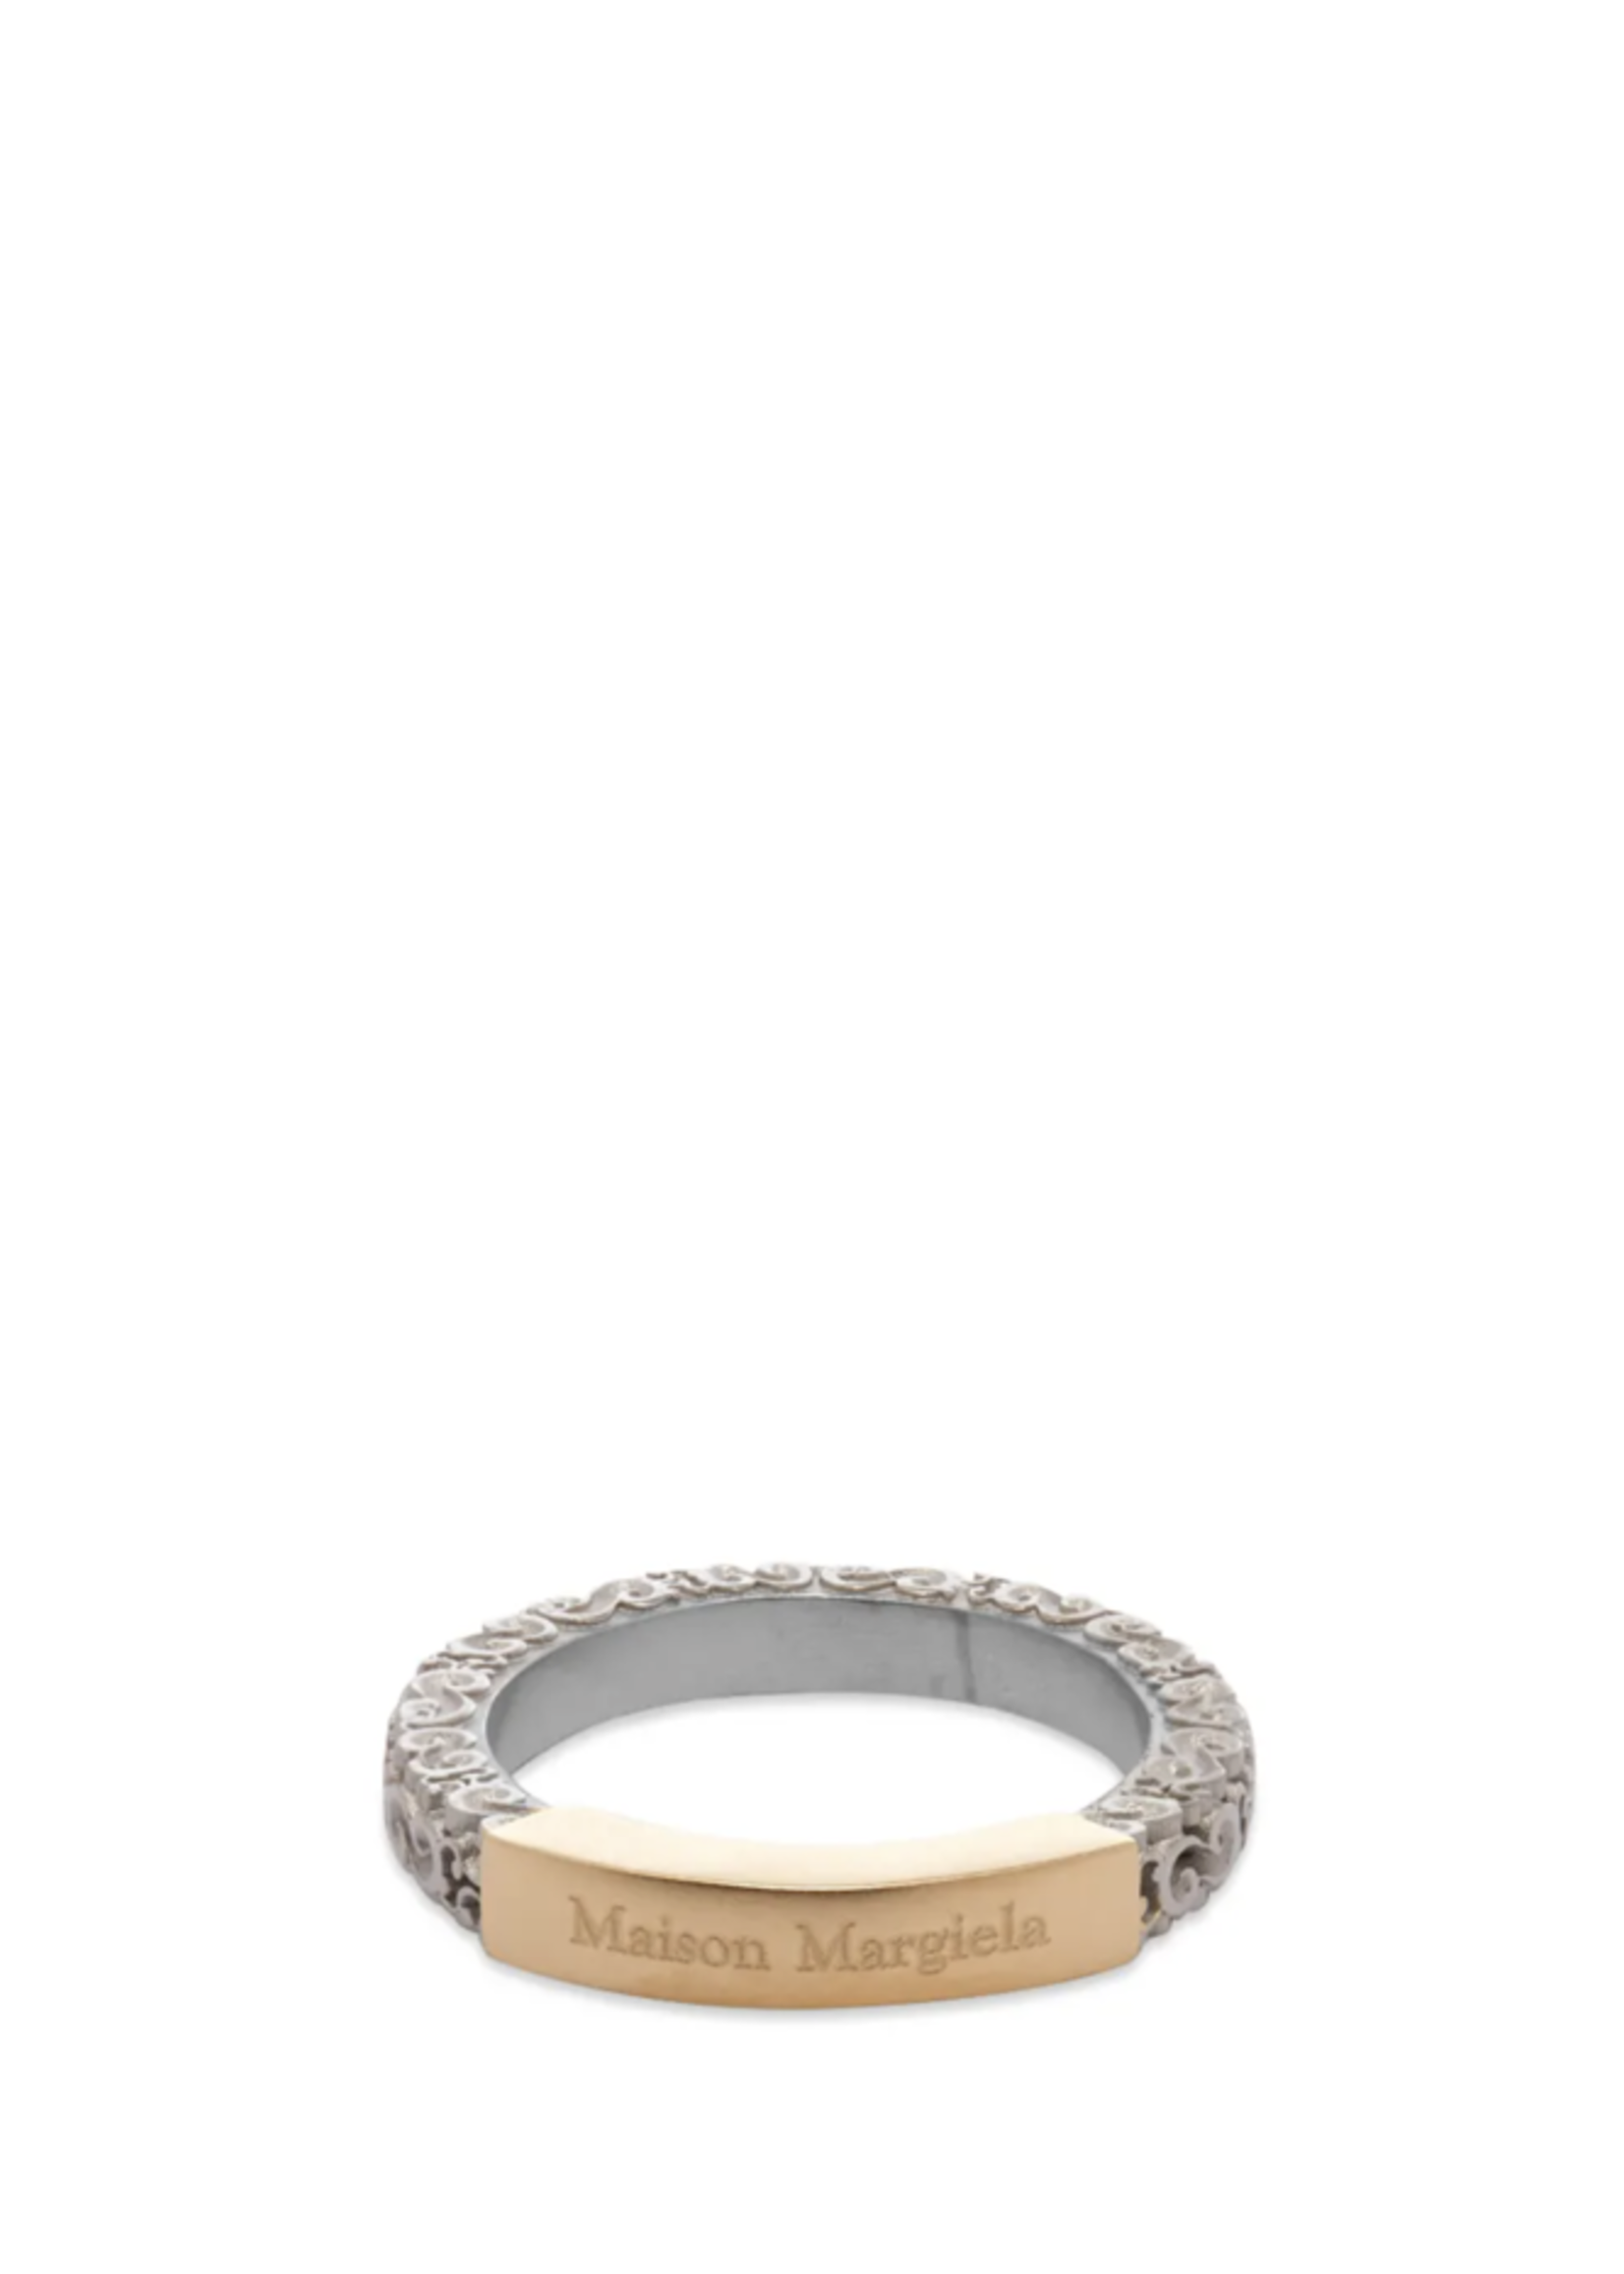 Maison Margiela Logo ring in Silver and Gold